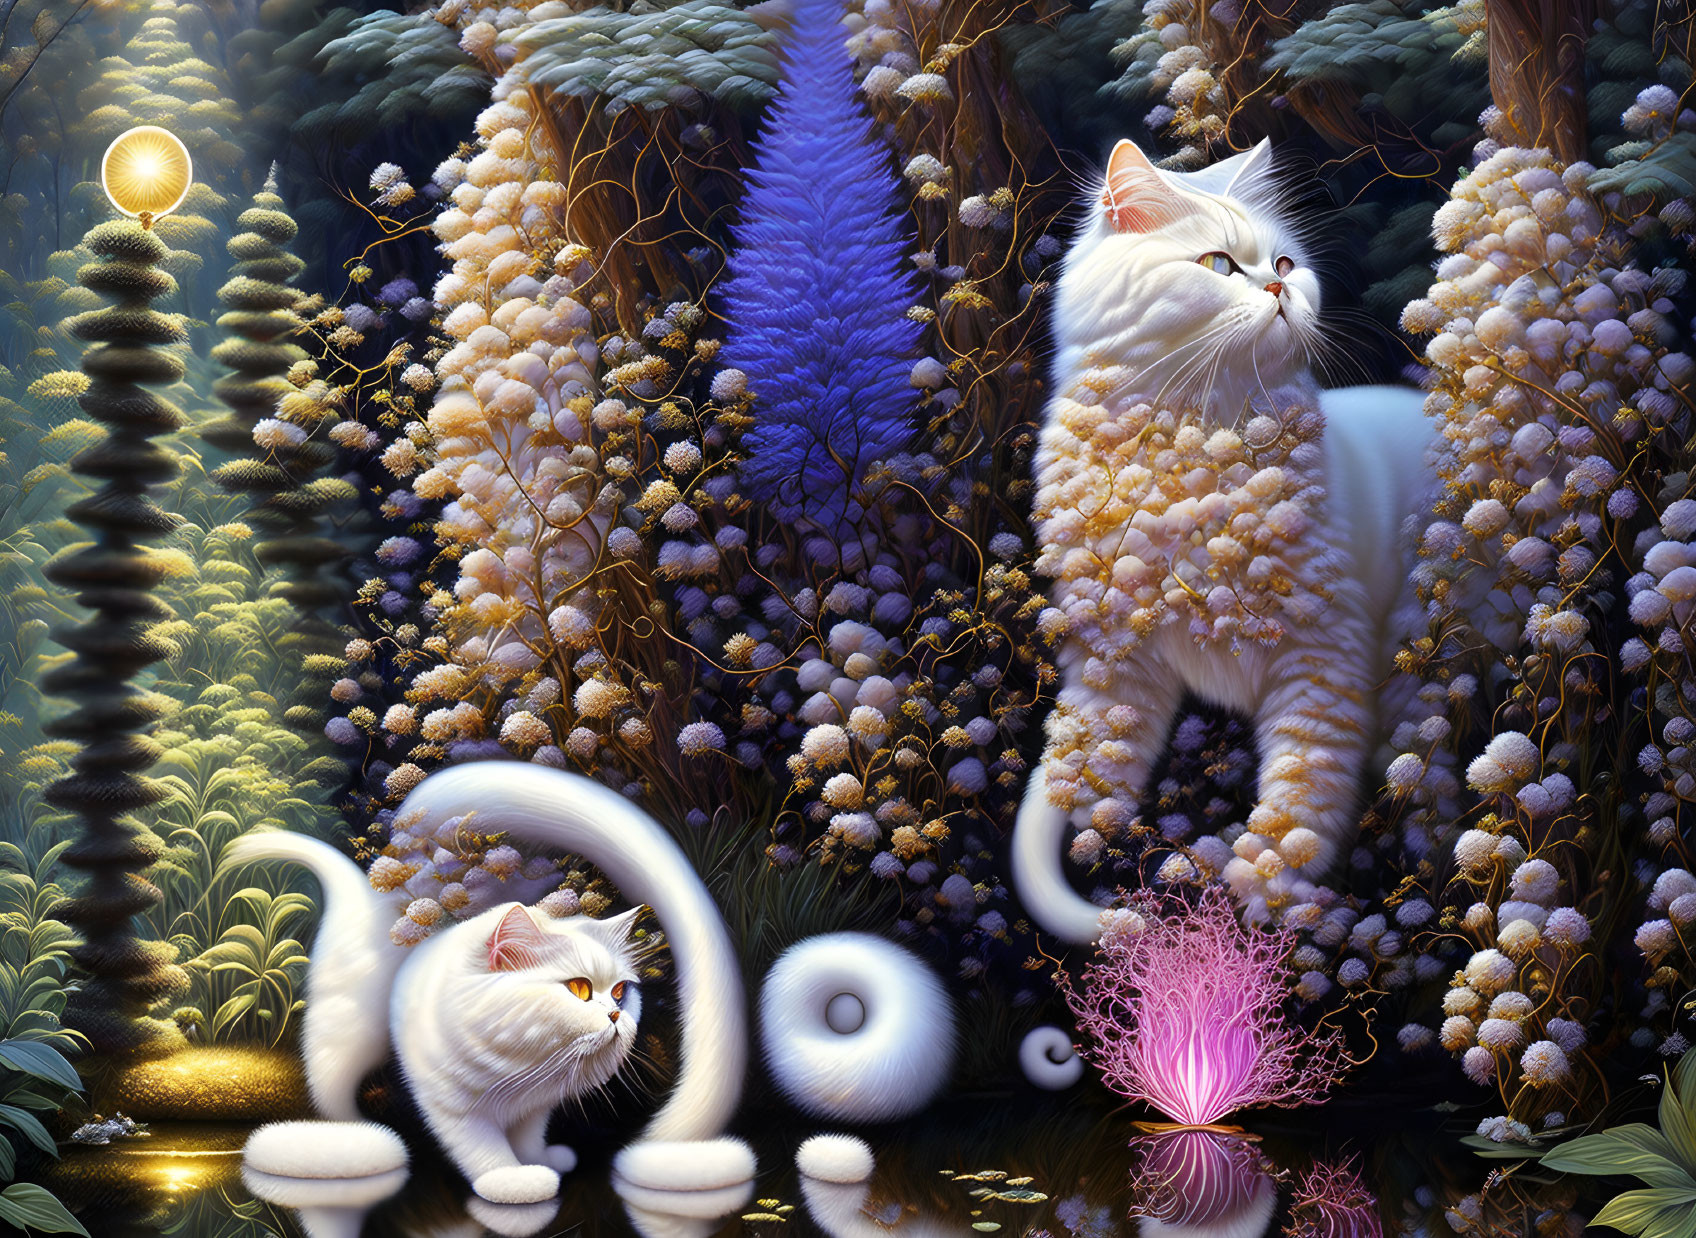 Whimsical digital art: Two fluffy cats in fantastical forest